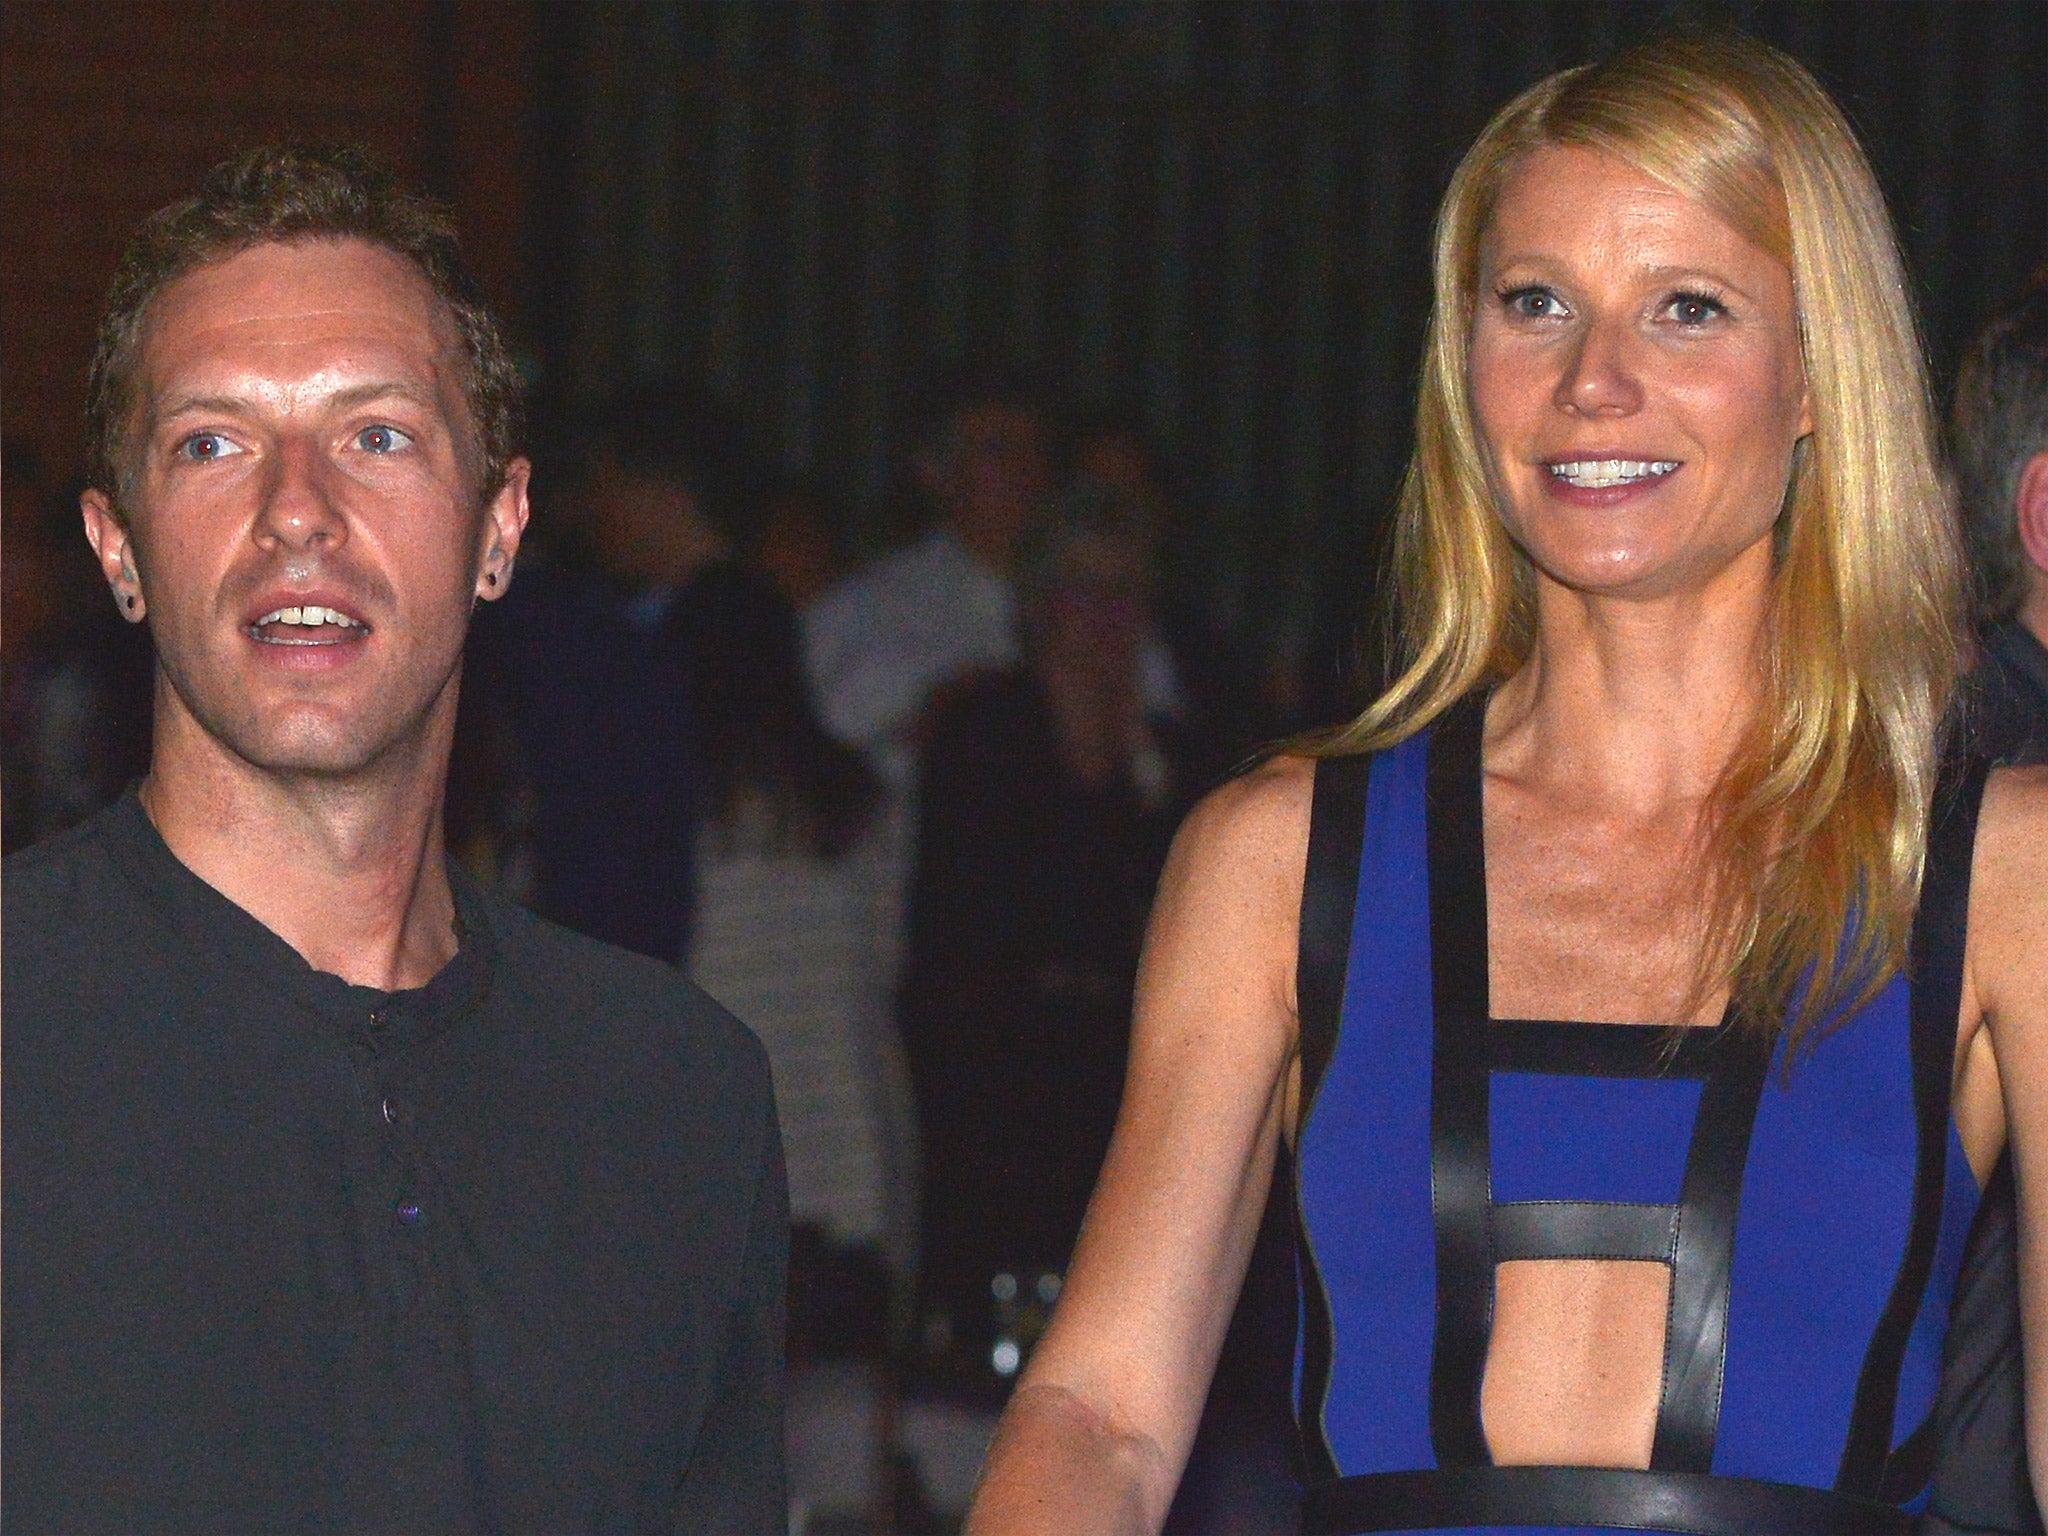 Actress Gwyneth Paltrow and Coldplay singer Chris Martin, pictured at a charity event in January